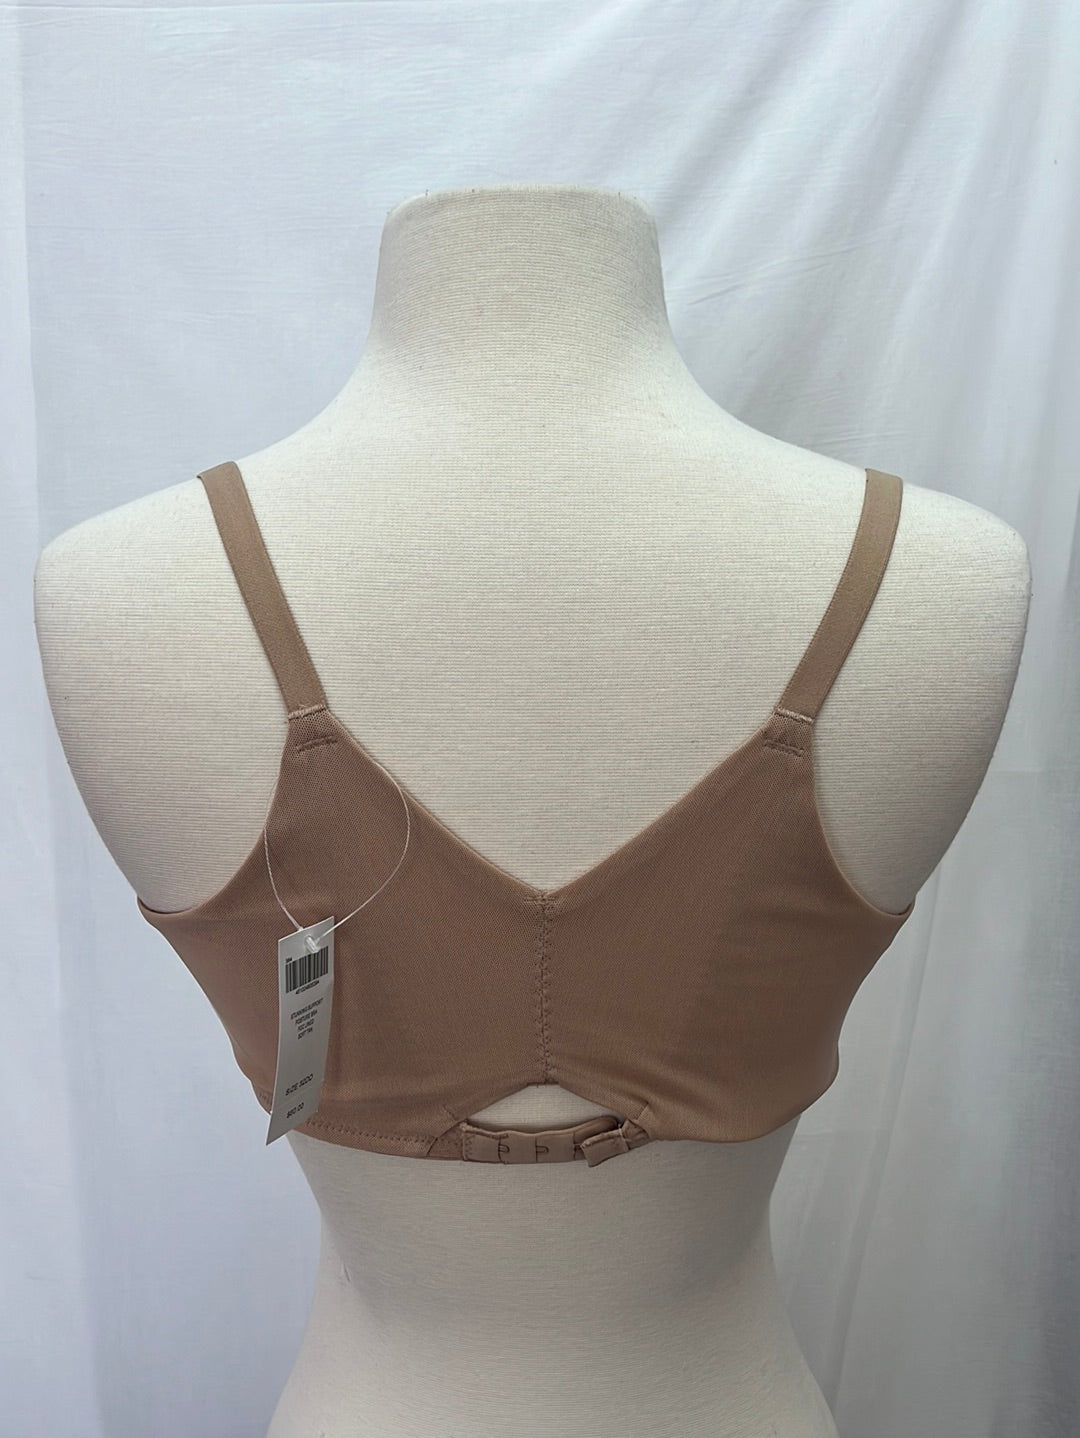 NWOT Soma Bra Brown & Nude Lace Enticing Lift Full Coverage 32DDD